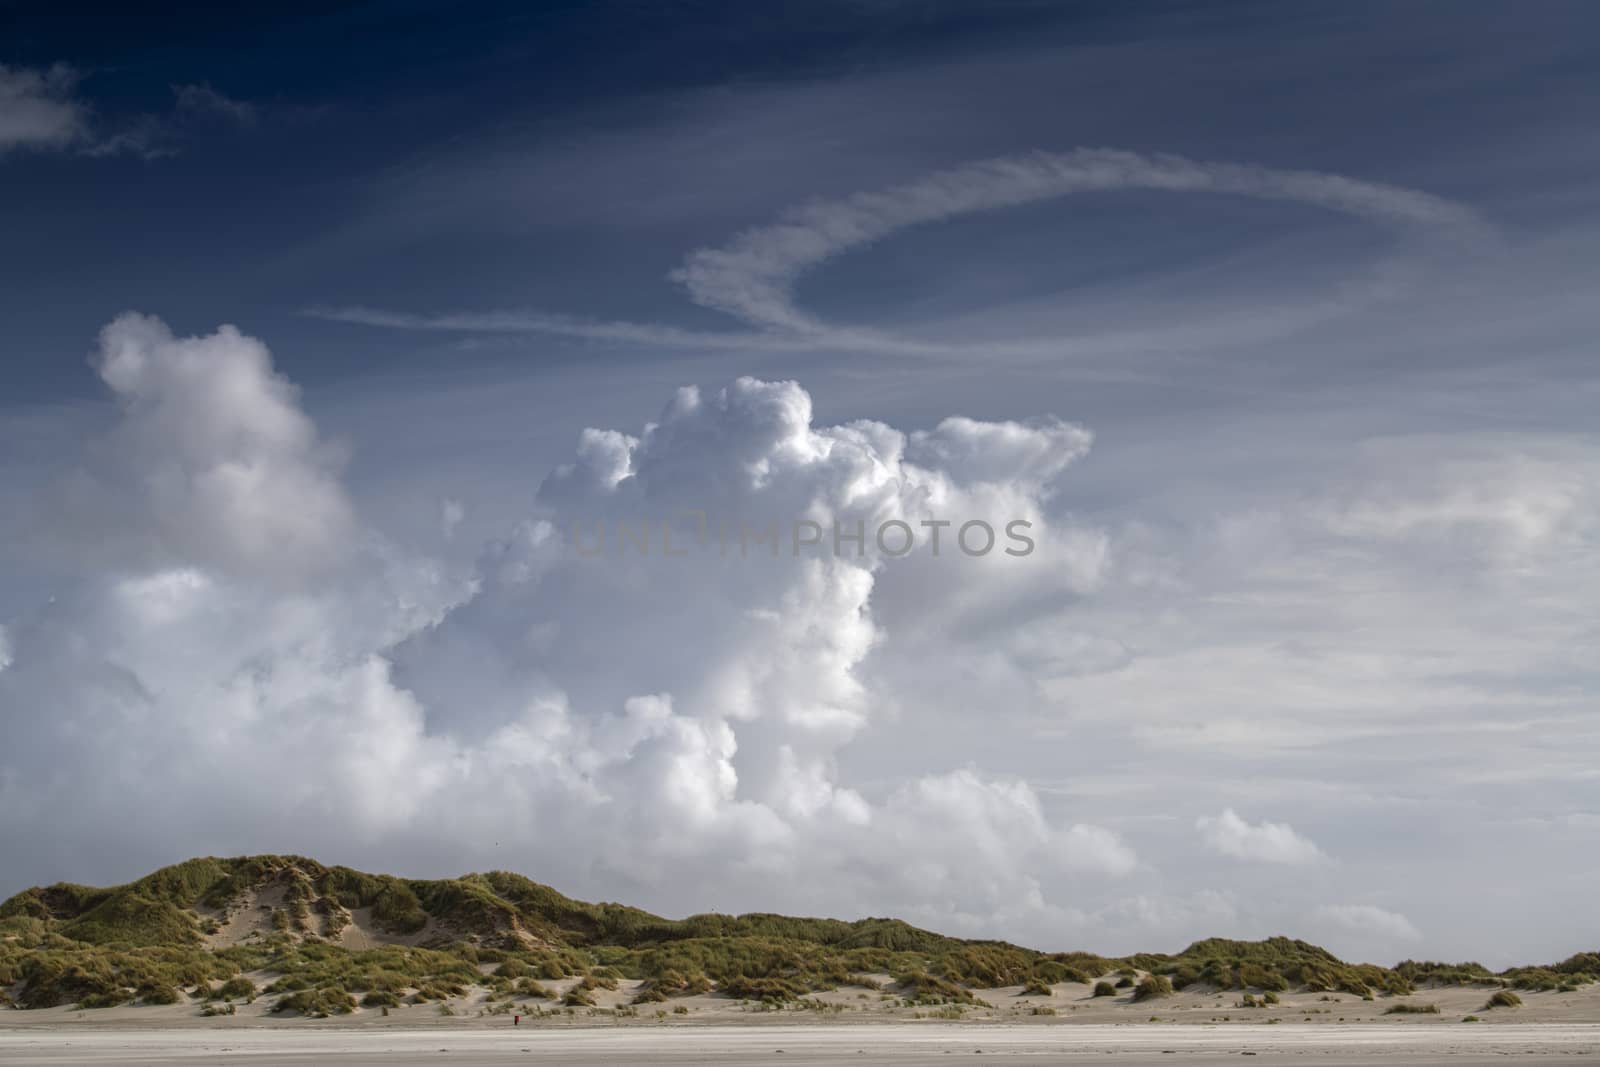 Cloud formations over the dunes on the island of Terschelling 
 by Tofotografie